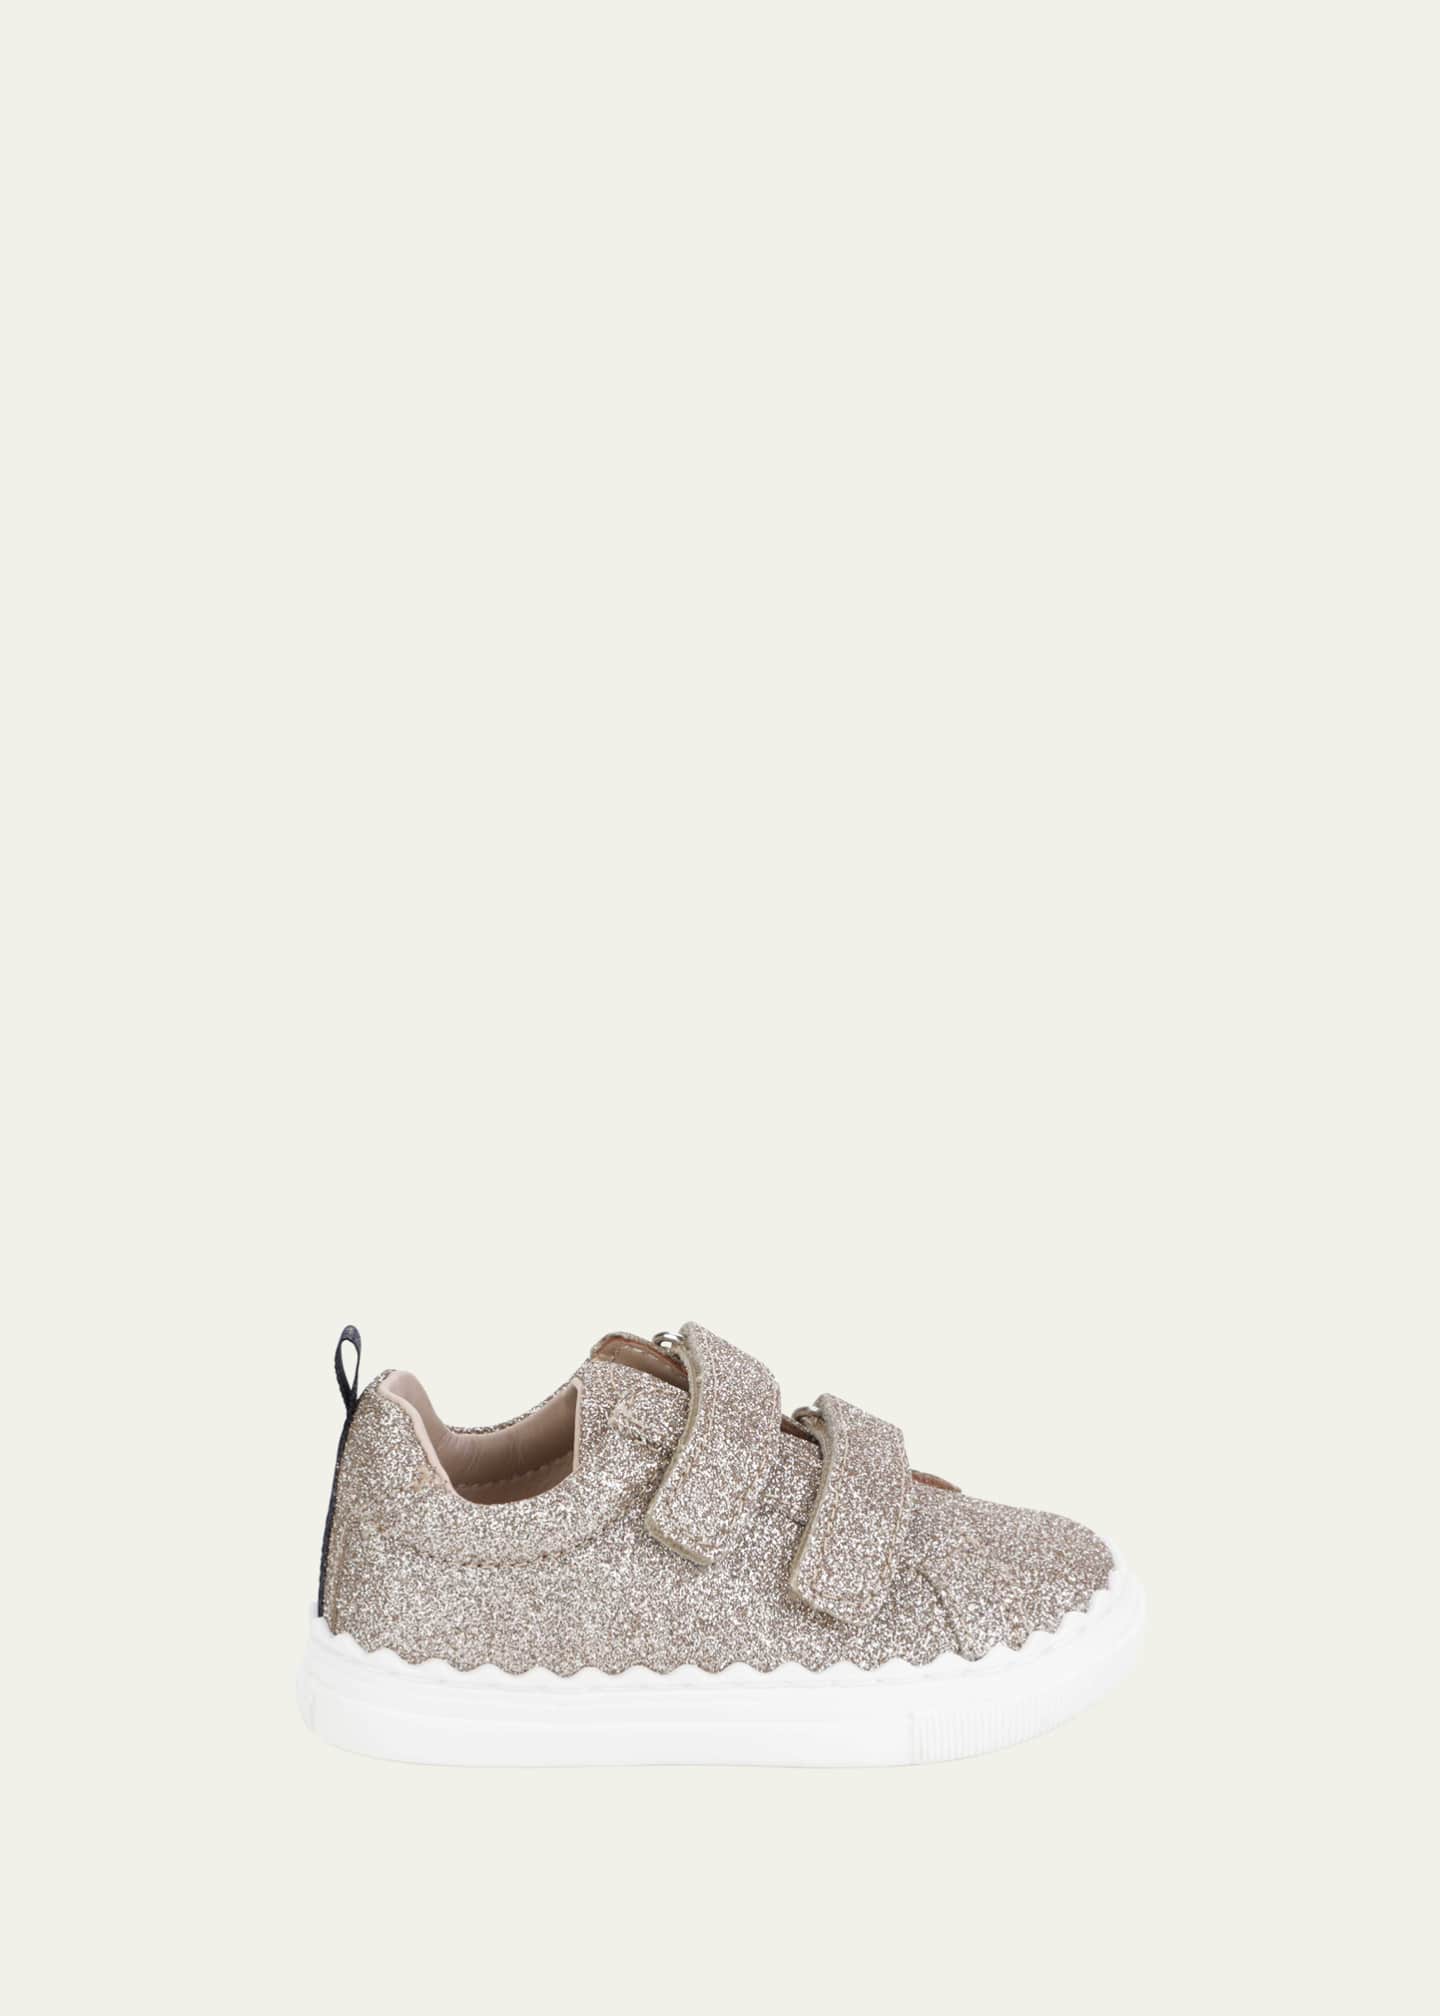 Chloe Girl's Grip Strap Glittery Calf Leather Sneakers, Baby